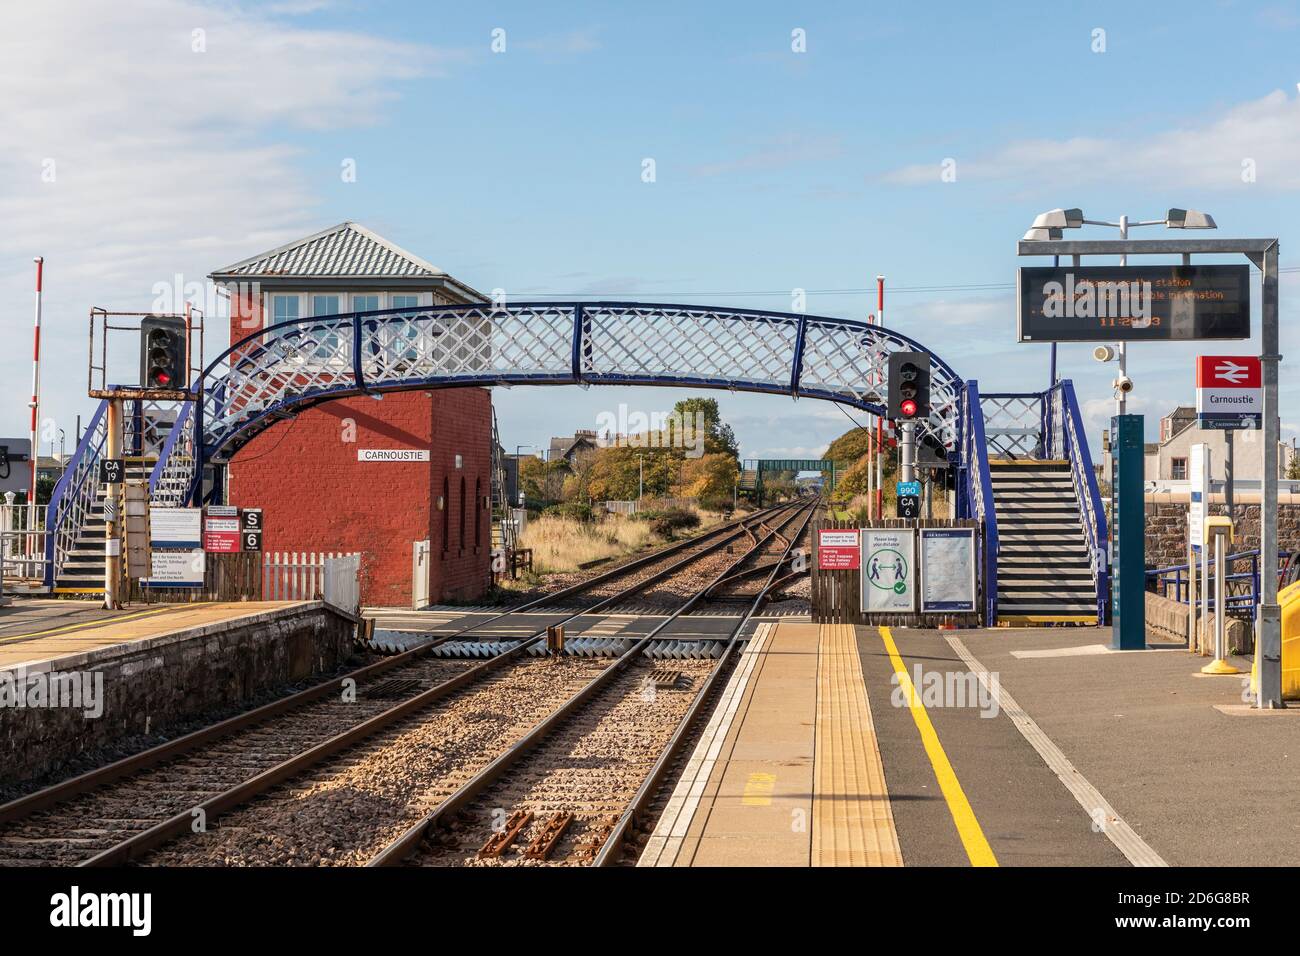 Carnoustie railway station with iron footbridge and old fashioned signal box, Carnoustie, Scotland, UK Stock Photo